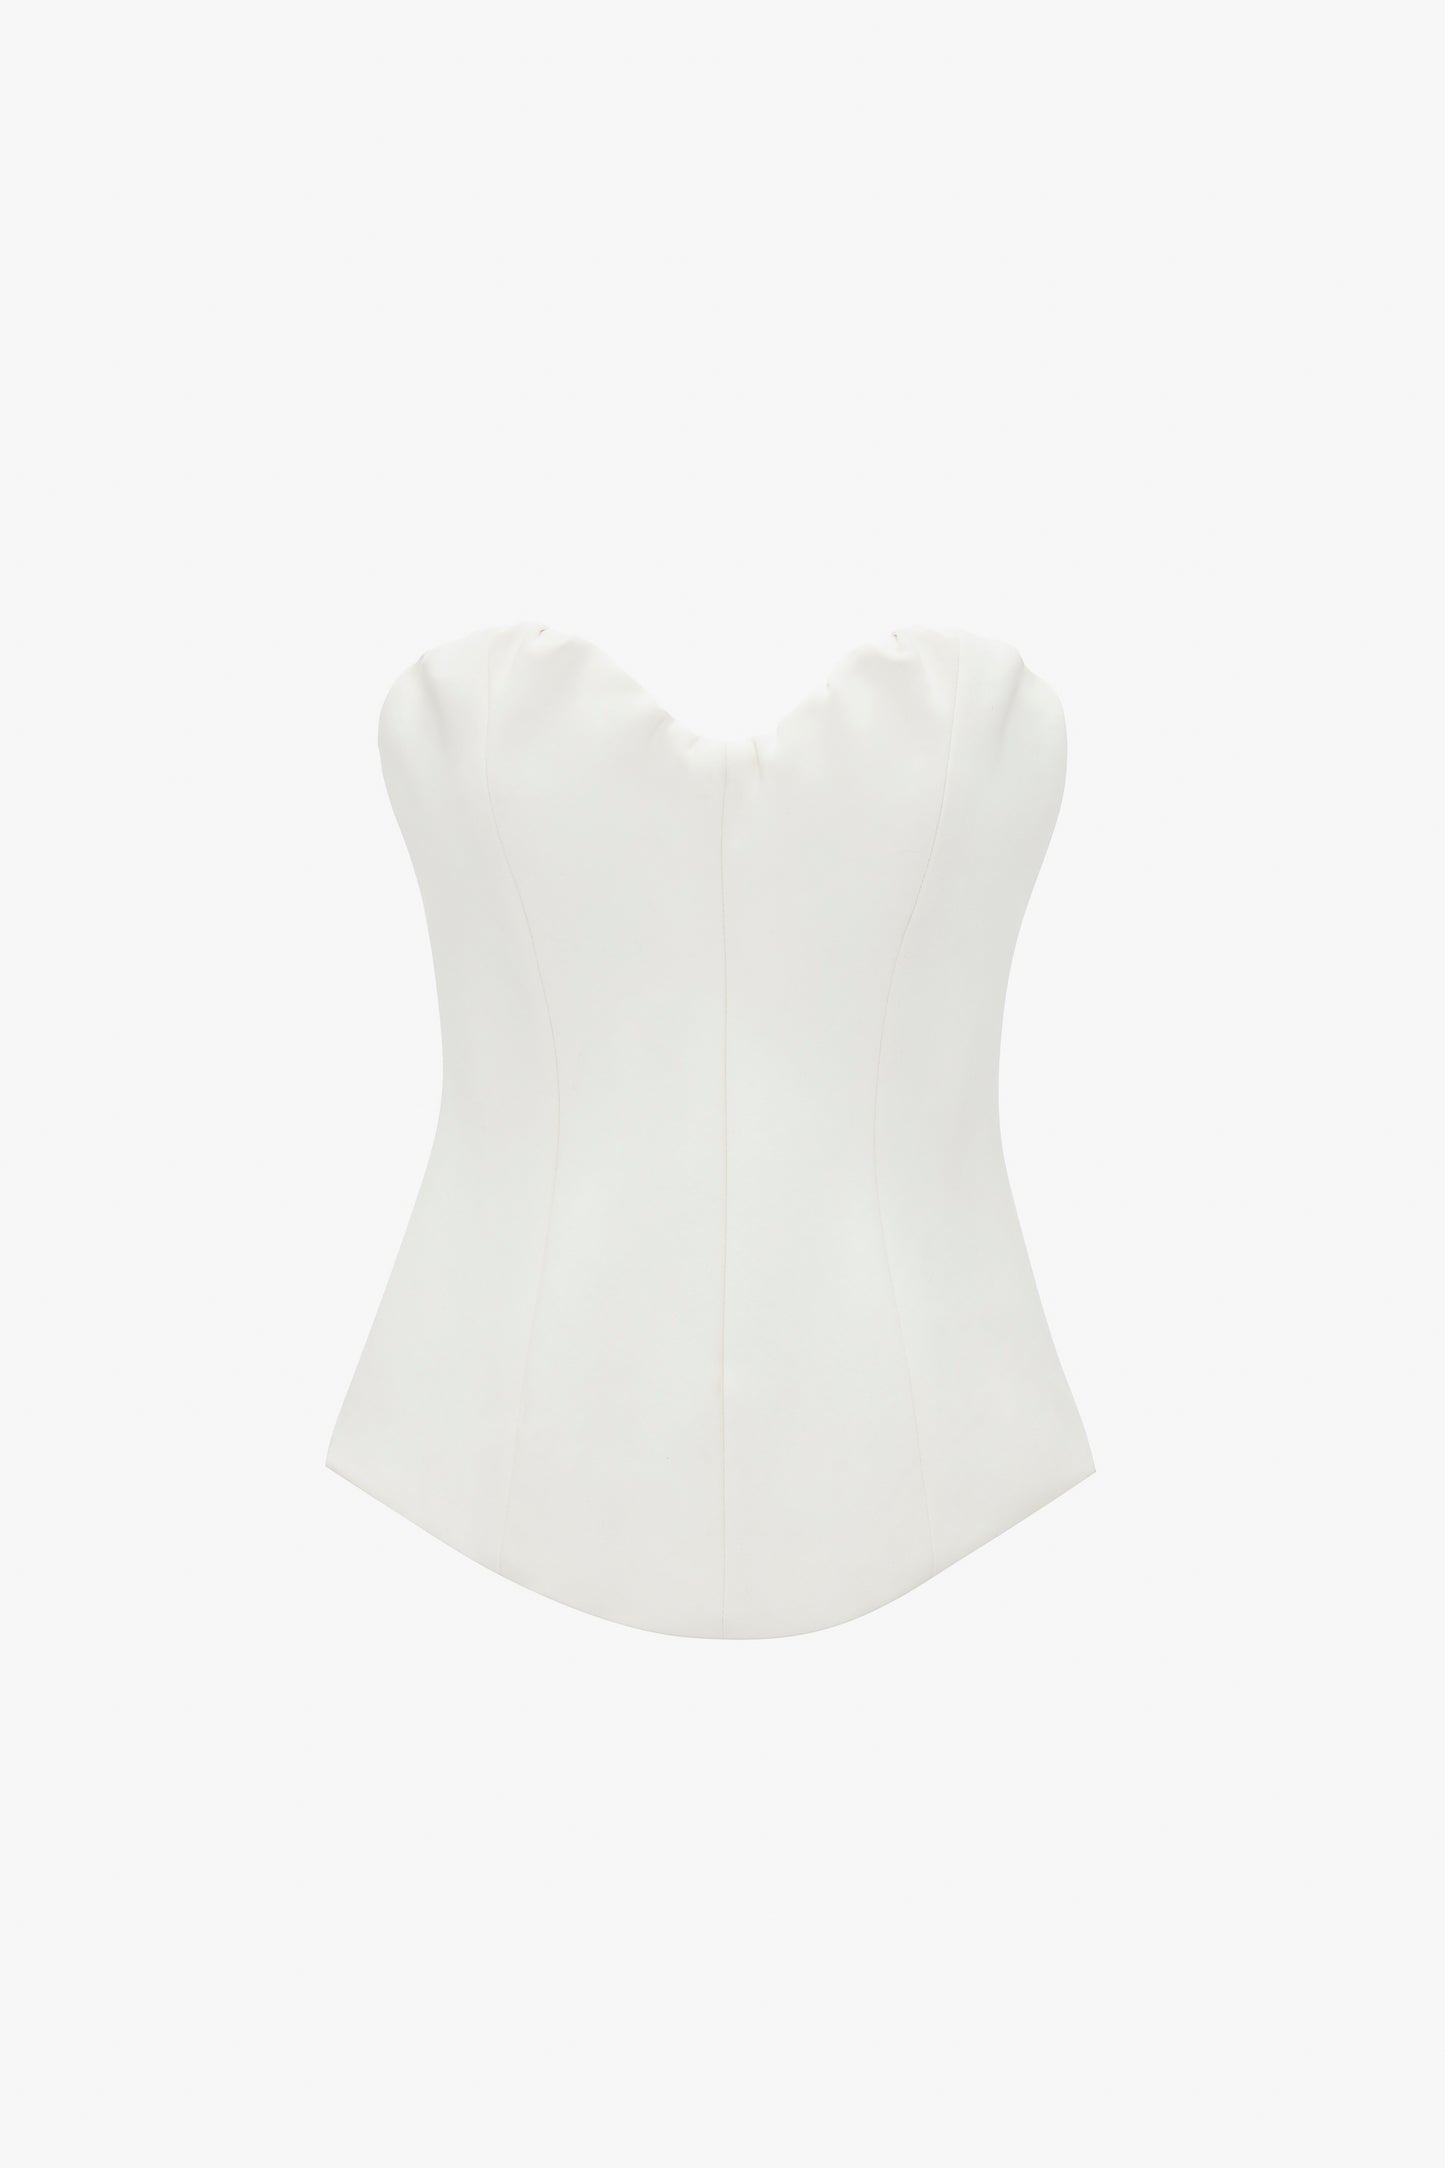 Victoria Beckham Antique White Strapless Corset Top with a Sweetheart Neckline, displayed on a white background.